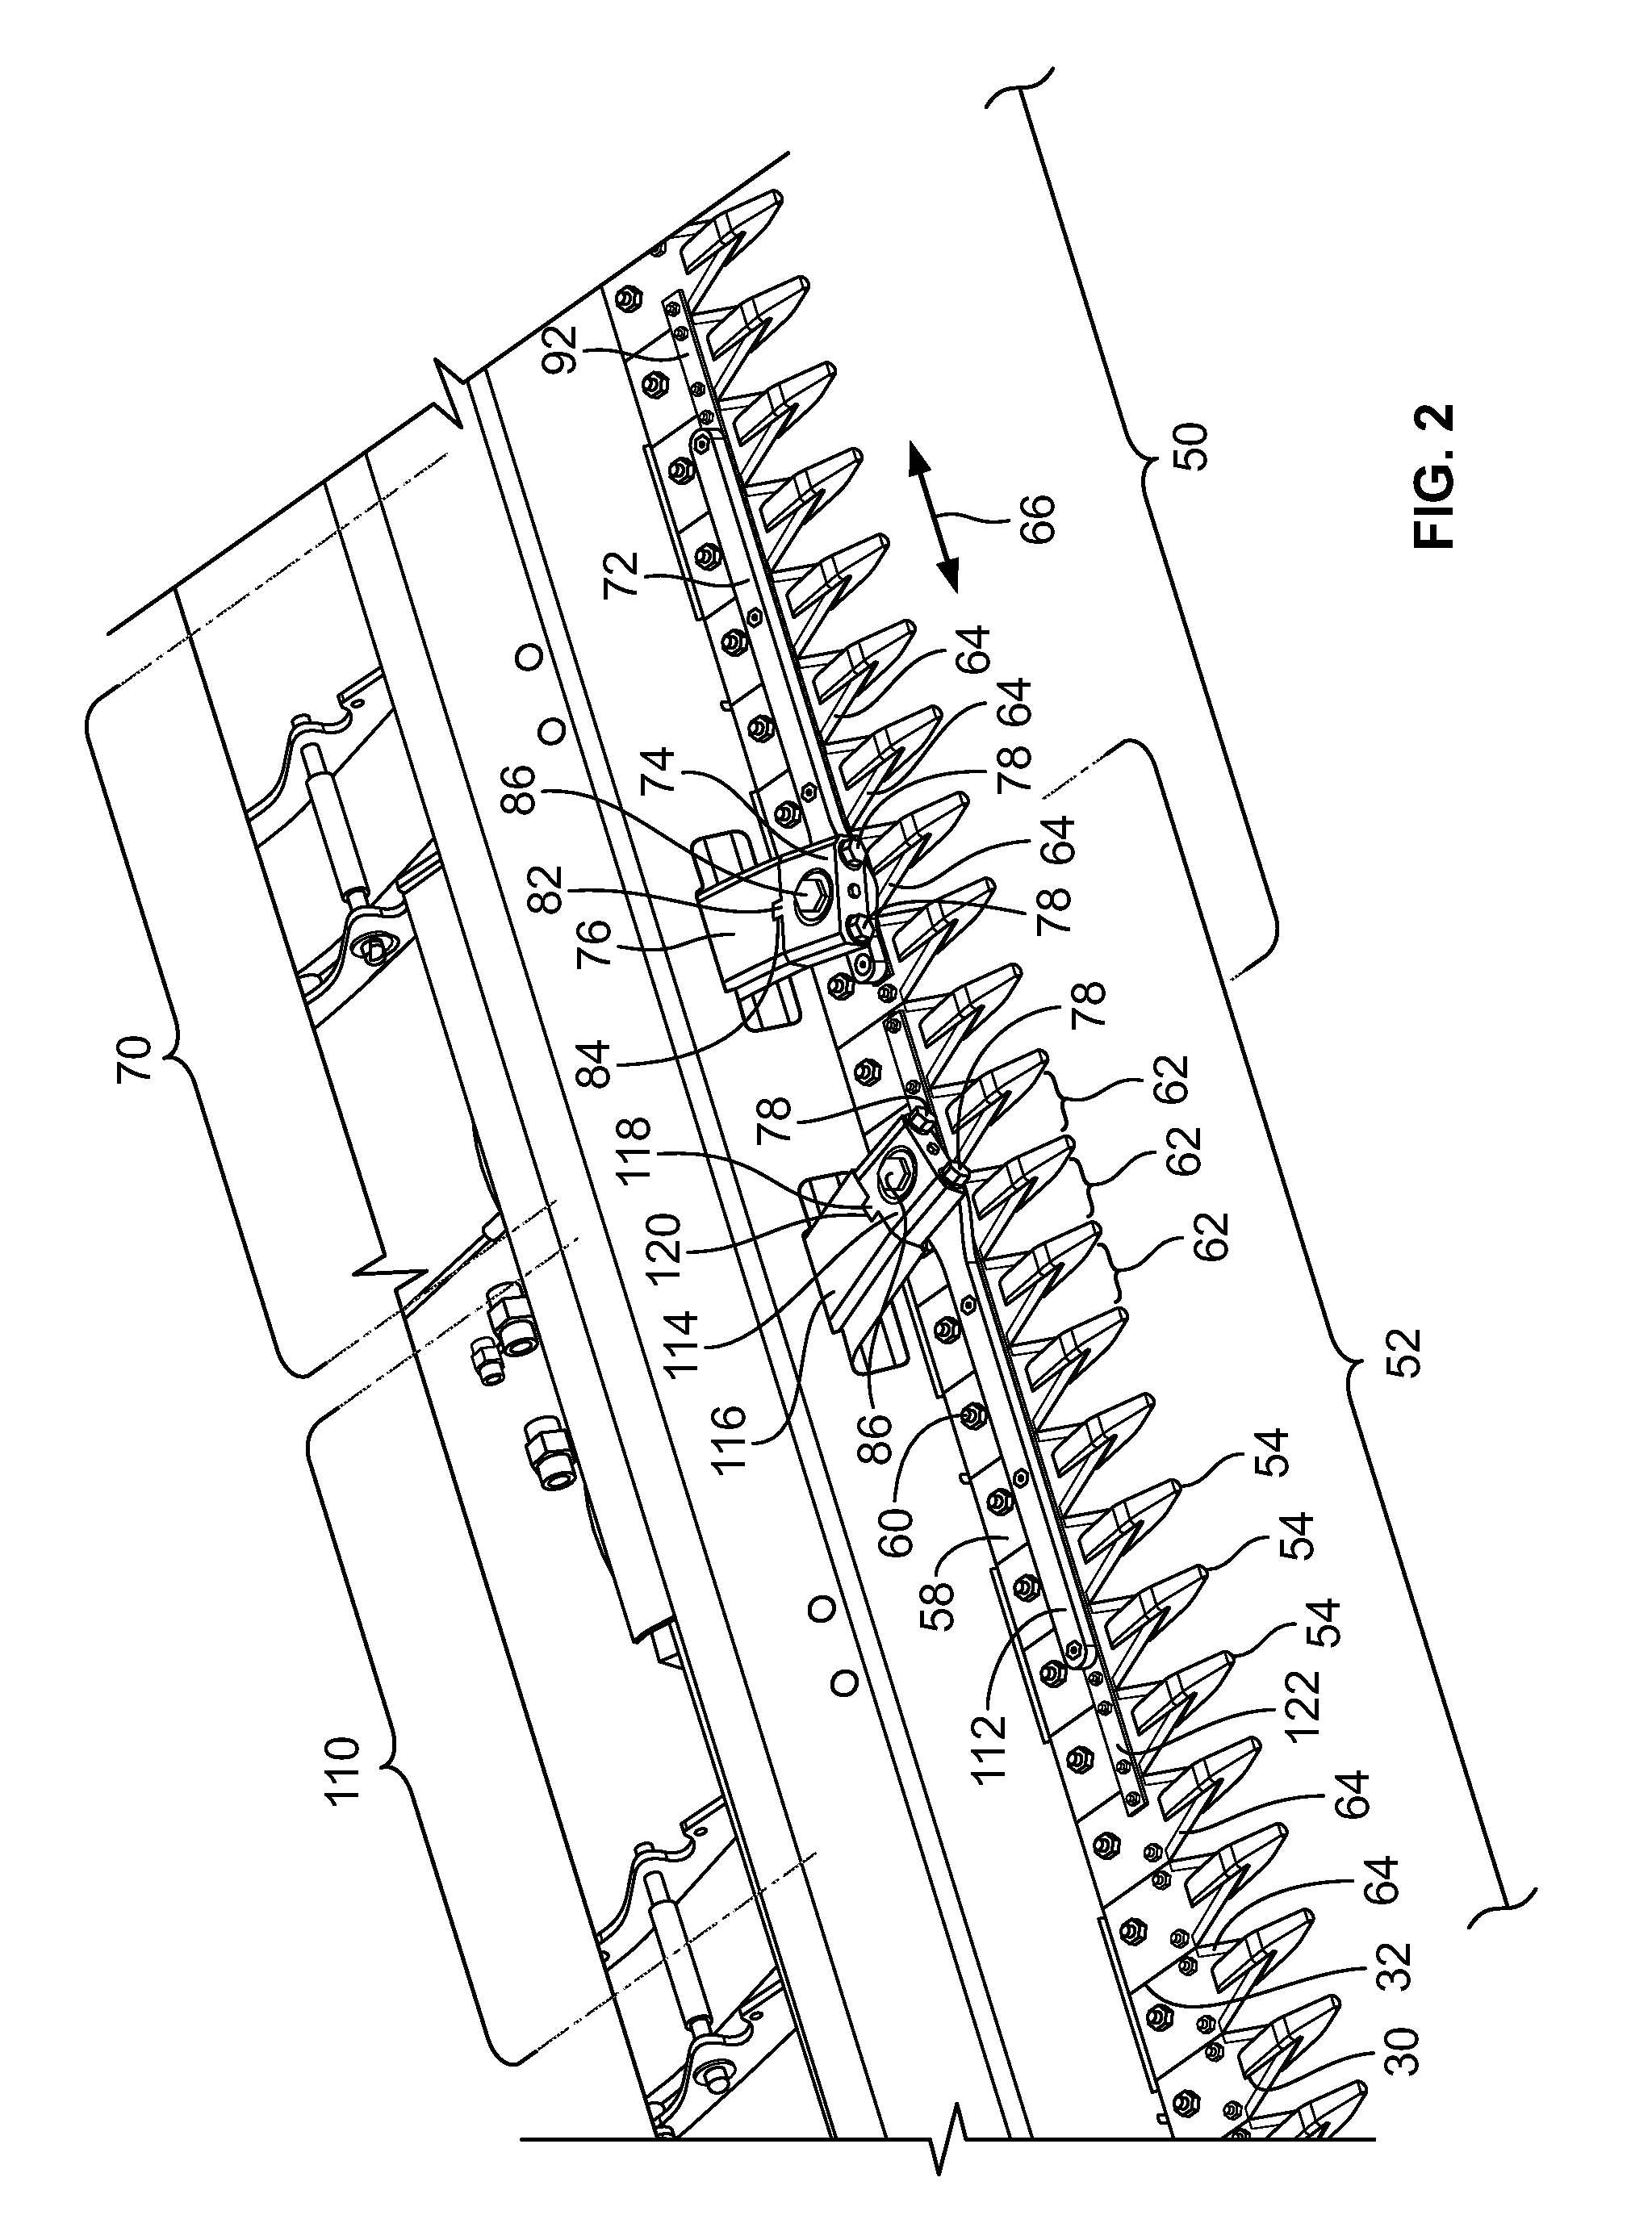 Plant-cutting assembly for a header